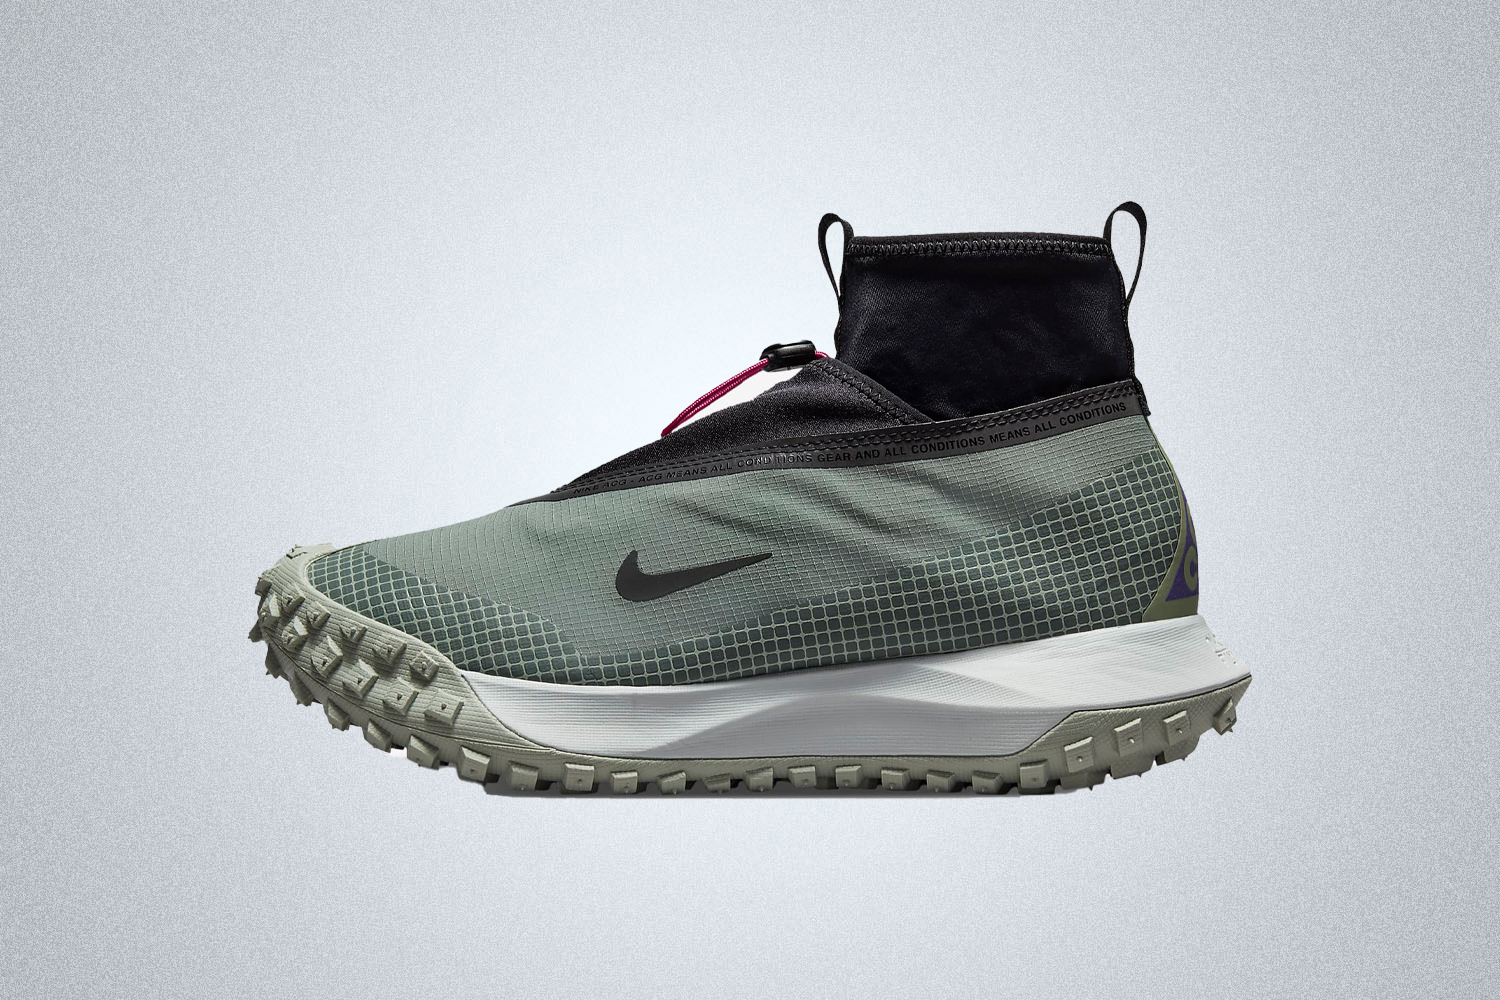 The Nike ACG GORE-TEX "Mountain Fly" hiking shoe is perfect for the outdoors when running or hiking on the trail in 2021